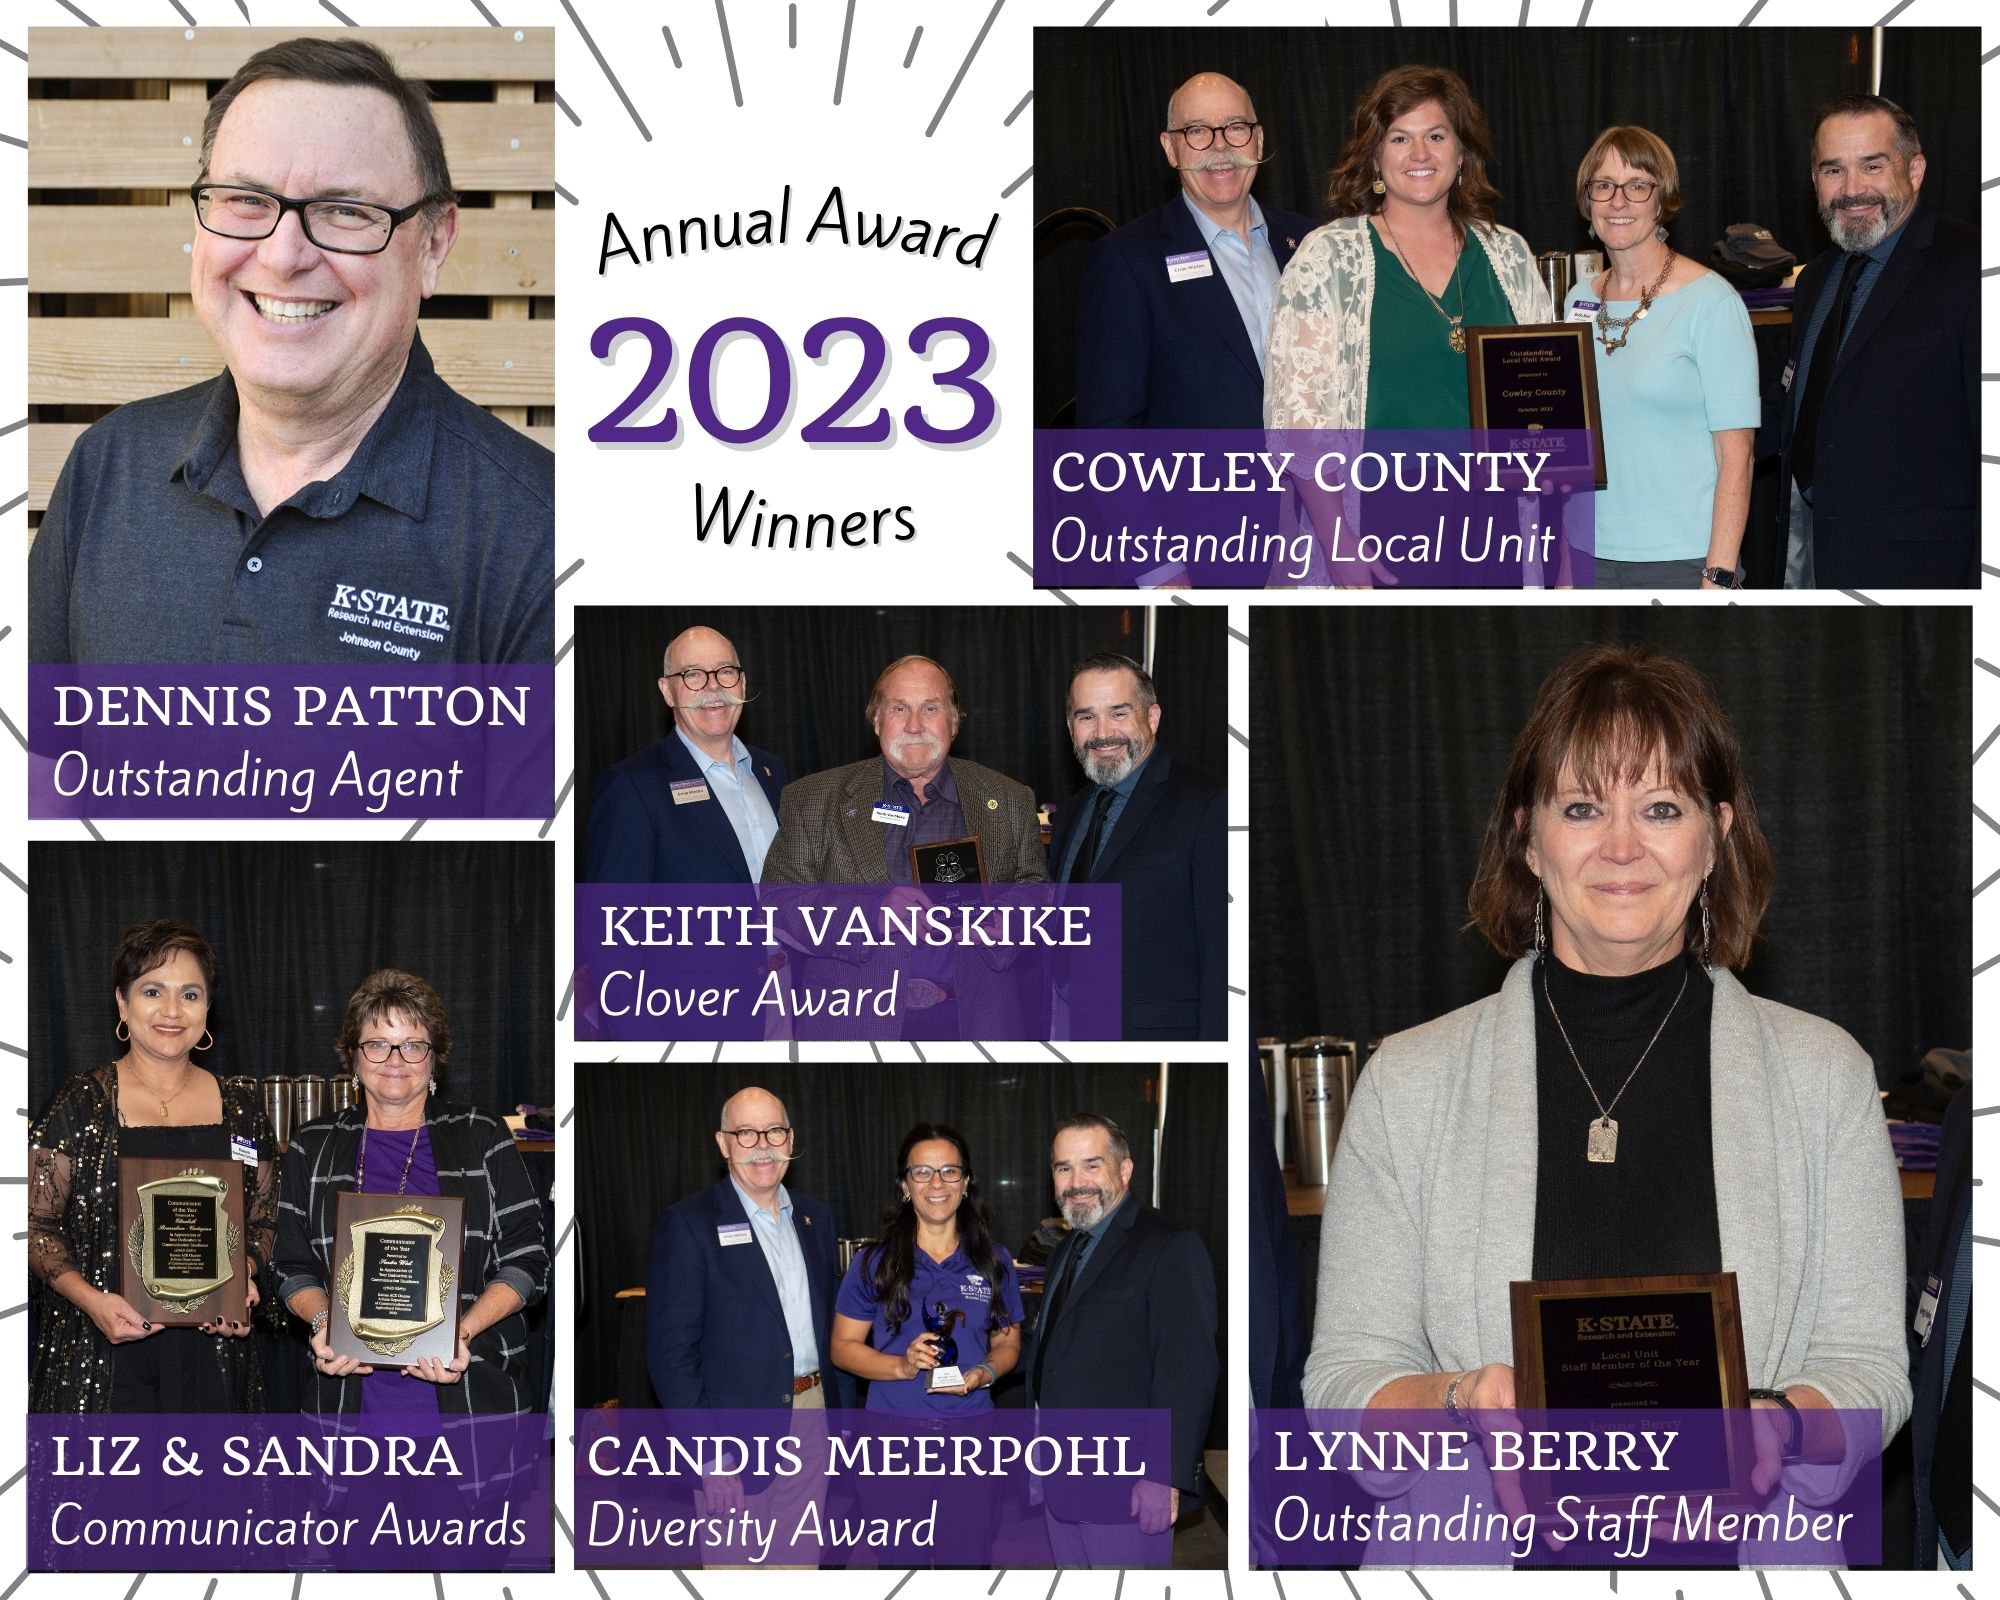 Collage of 2023 award winners.  Below their photos, each winner is named along with their award.  This information can be found in the list below.